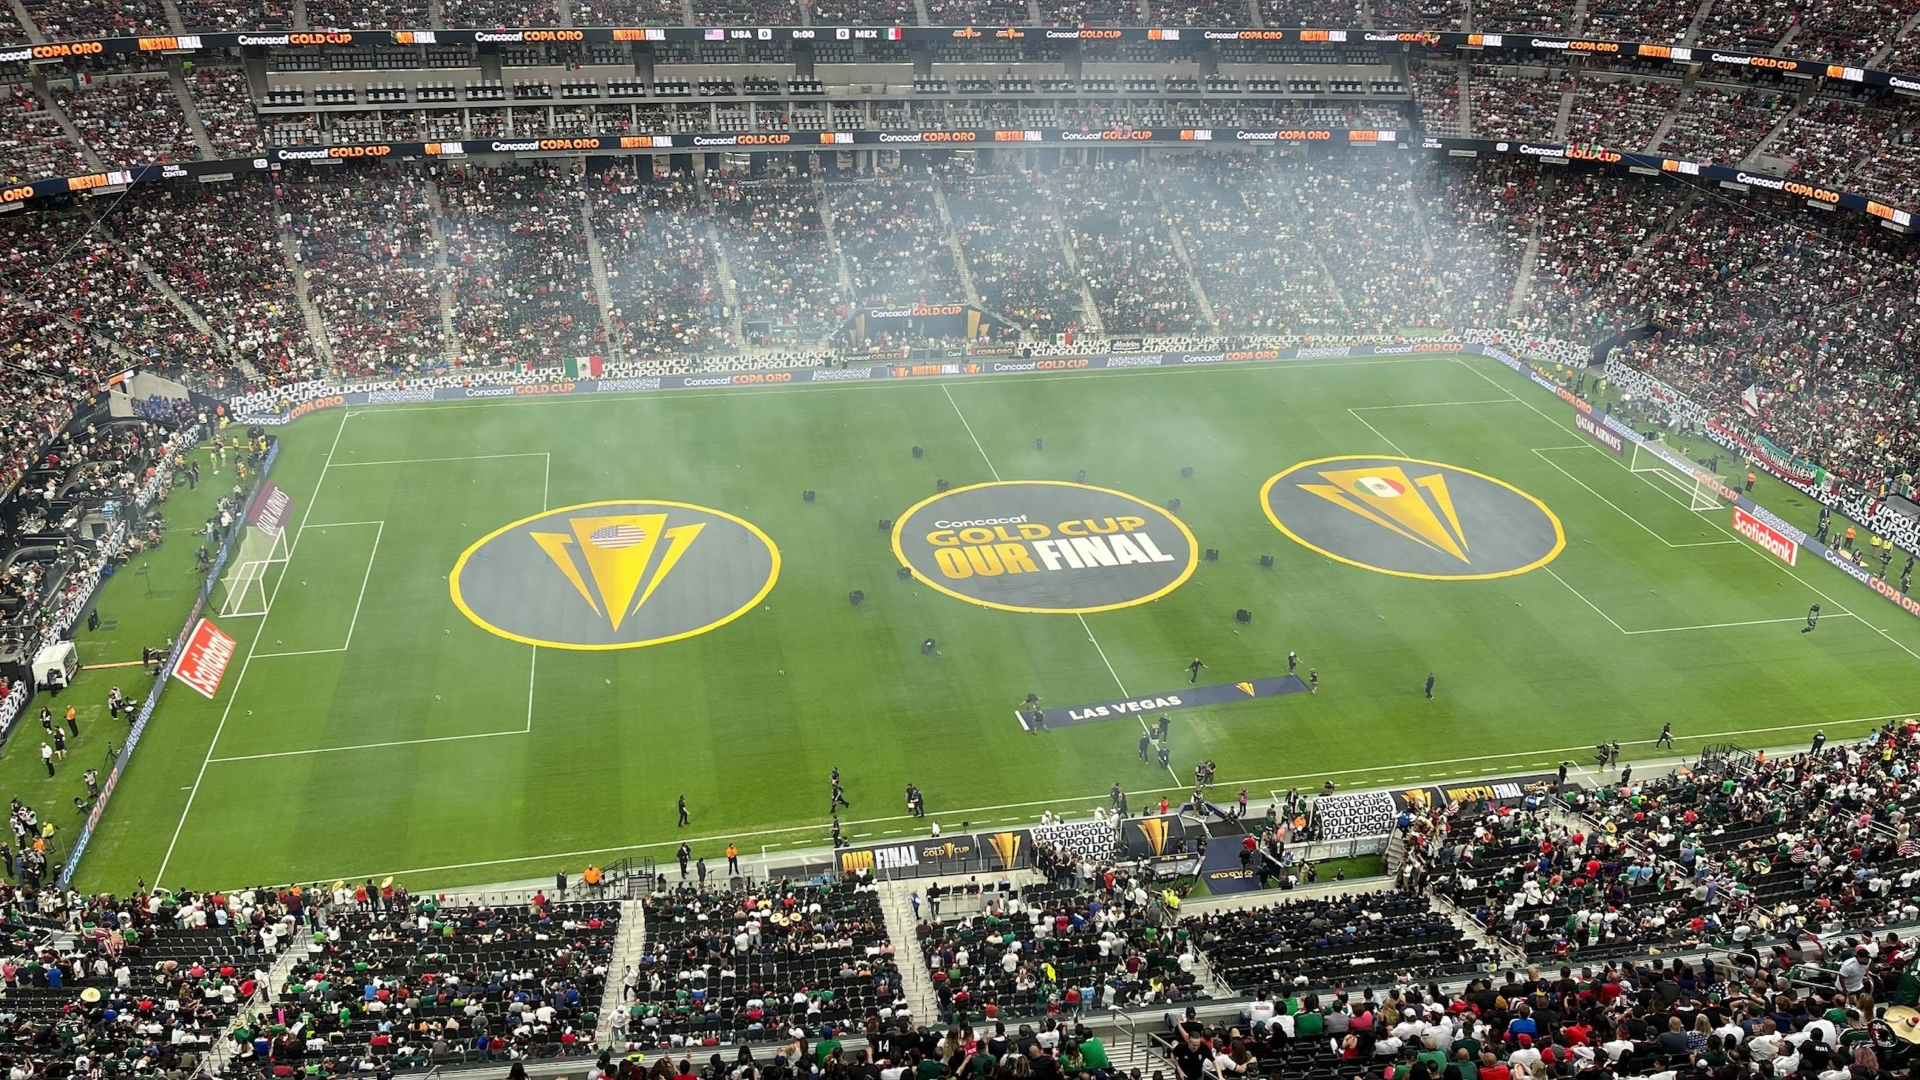 In 2021, AT&T Stadium hosted one group stage match and two same-day quarterfinals for the Gold Cup. The United States ended up winning the 2021 Gold Cup.